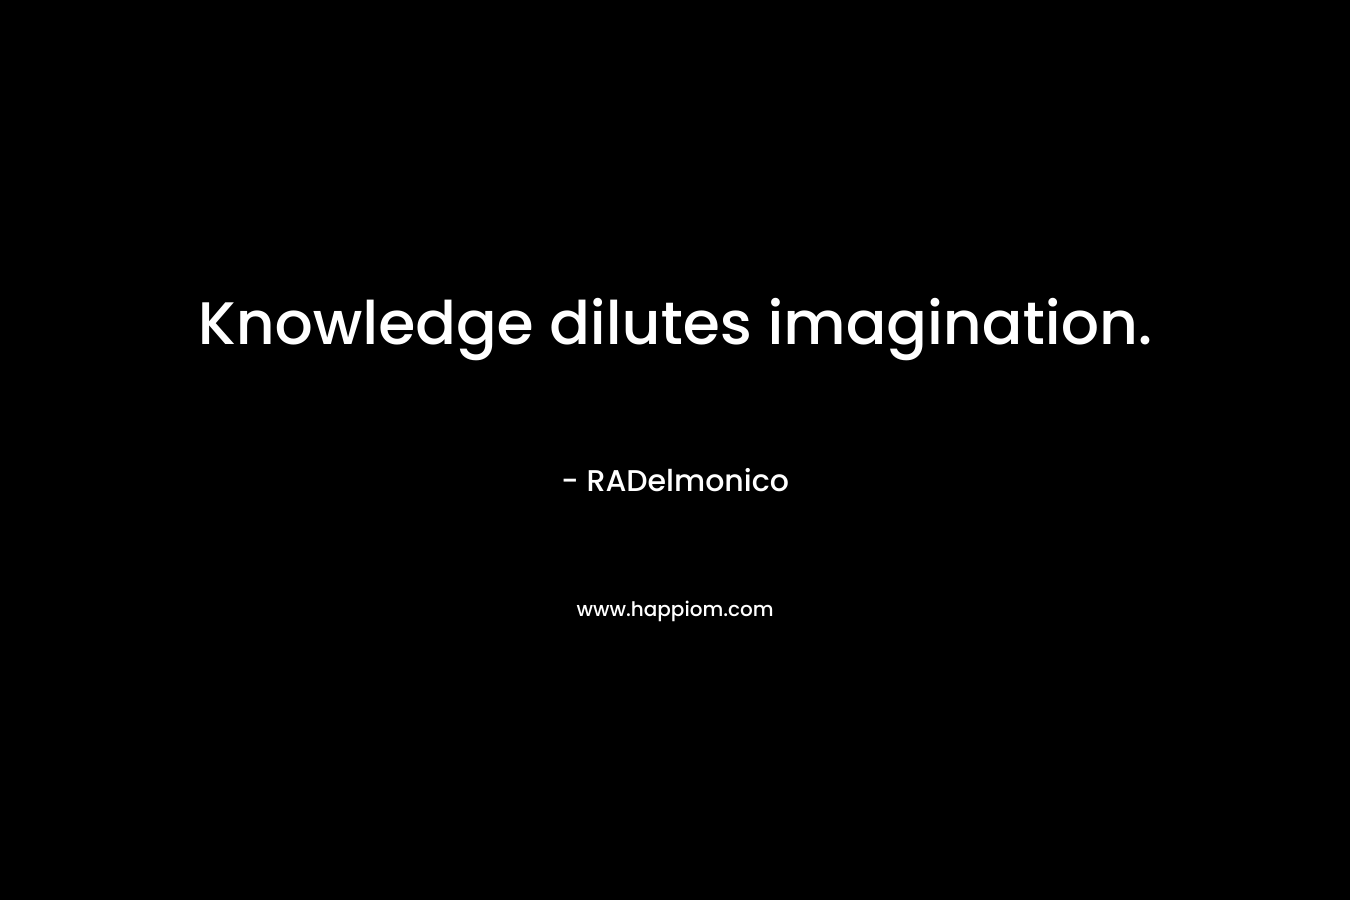 Knowledge dilutes imagination.